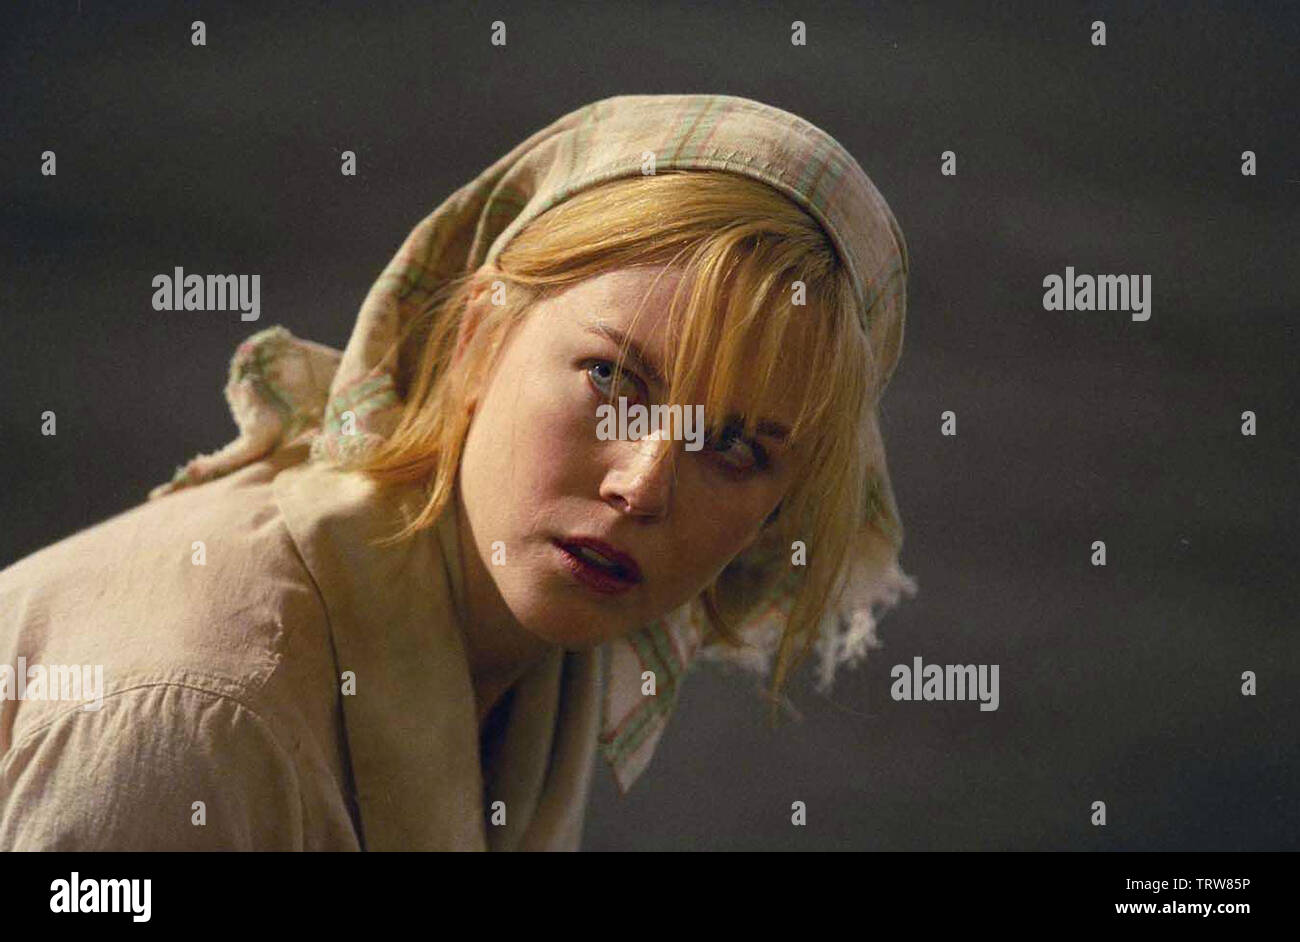 NICOLE KIDMAN in DOGVILLE (2003). Copyright: Editorial use only. No merchandising or book covers. This is a publicly distributed handout. Access rights only, no license of copyright provided. Only to be reproduced in conjunction with promotion of this film. Credit: FILMMEK / KONOW, ROLF / Album Stock Photo